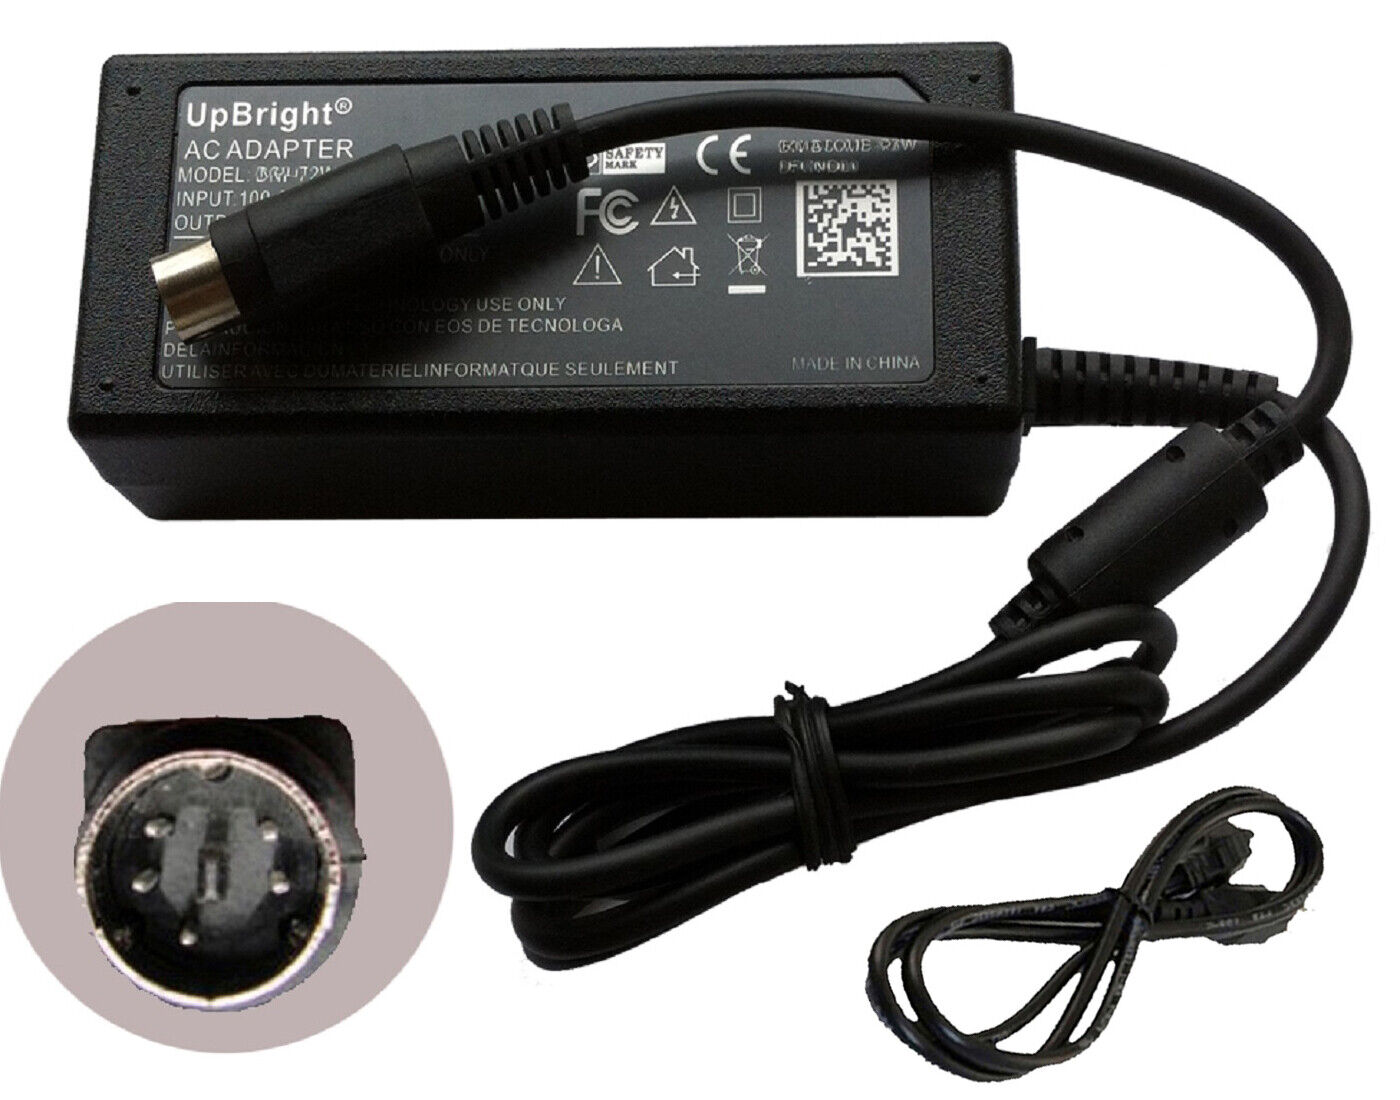 NEW AC Adapter For Iomega Hard Disk Drive HDD HD 5V 12V DC Charger Power Supply